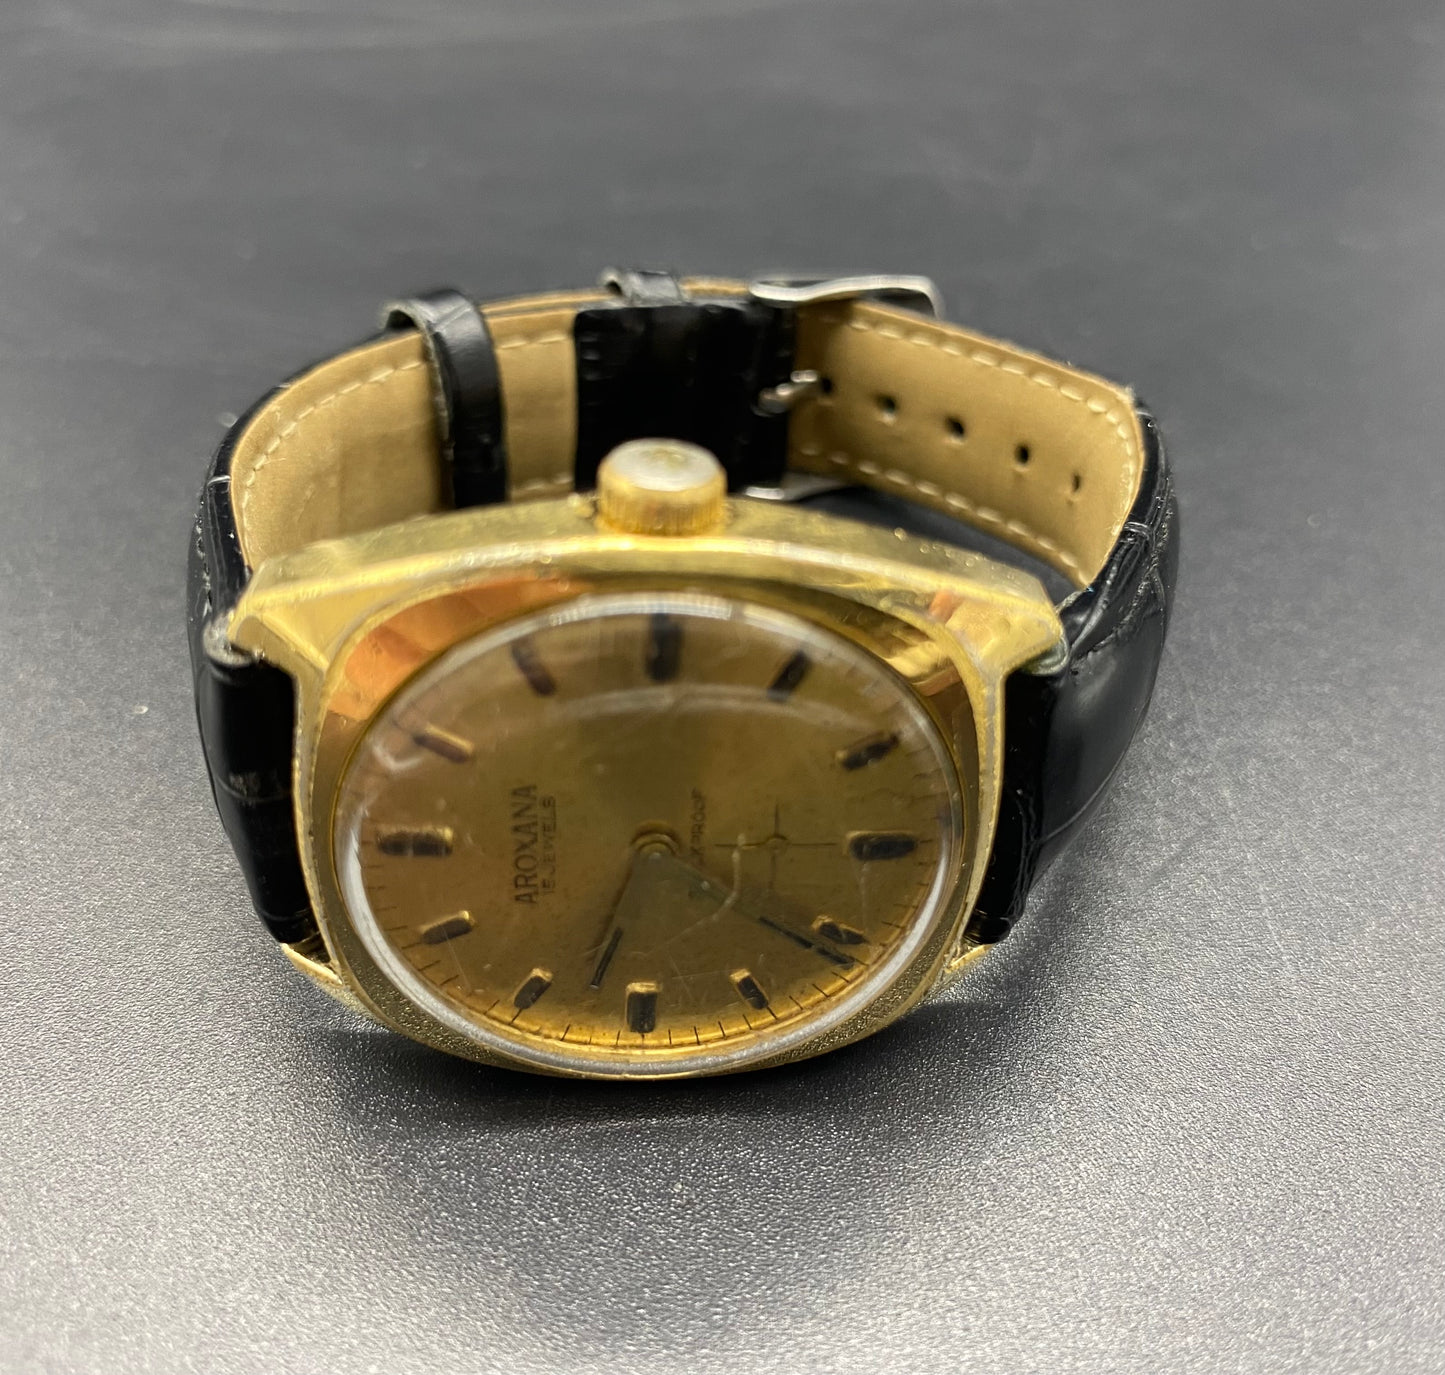 Vintage Retro SWISS AROXANA 15 Jewels Antimagnetic Watch   RARE 1960s Mens Mechanical watch on Leather Strap with a Really Nice Champagne Dial  KB ANTIQUES & WATCHES 